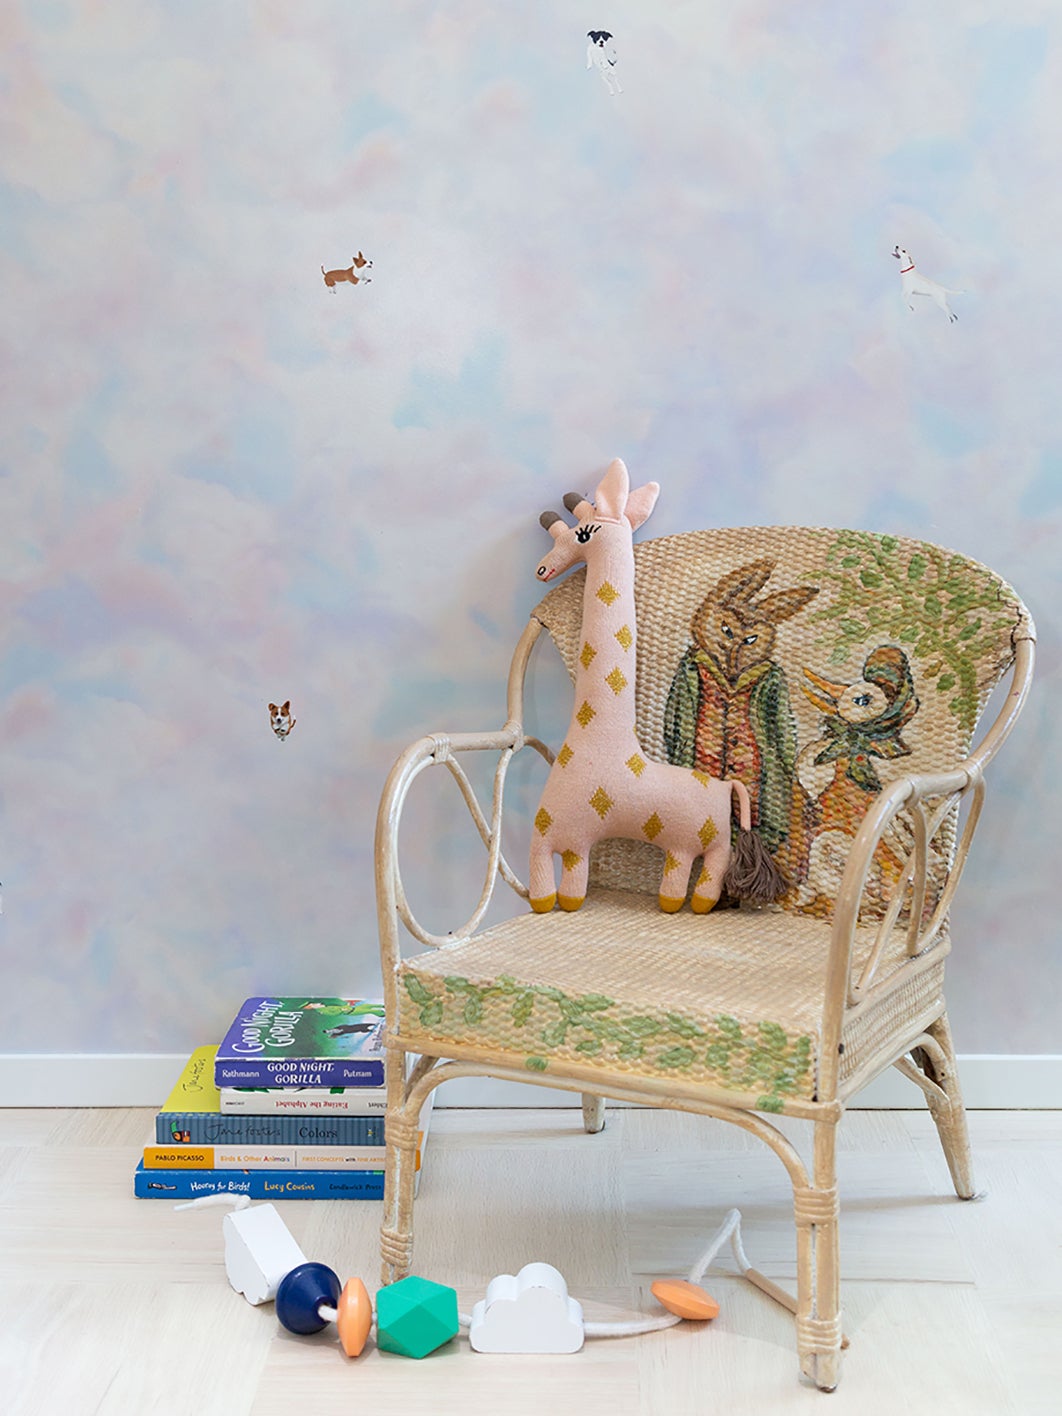 pale pink and blue wallpaper, baby chair and stuffed girafe